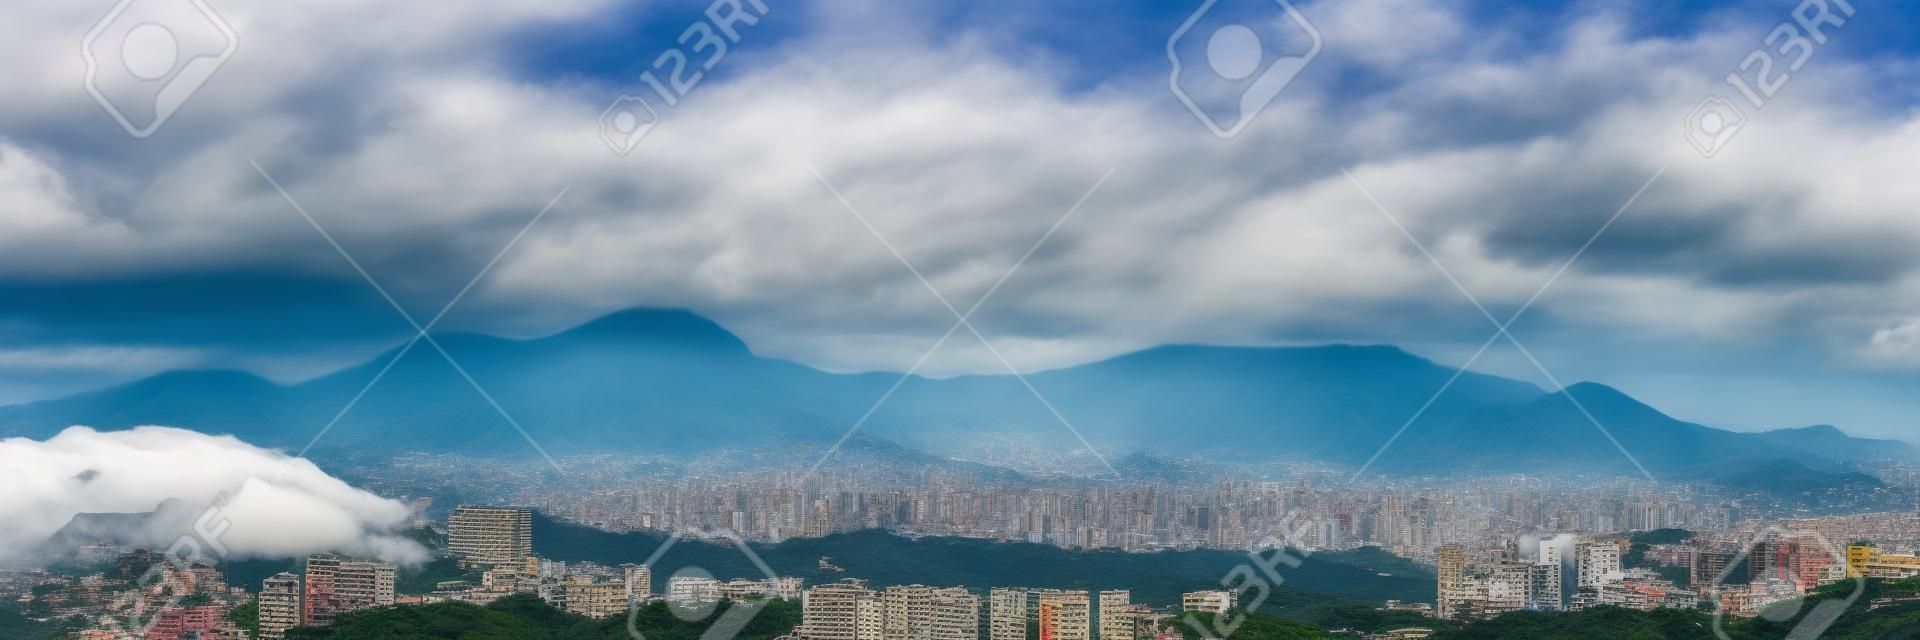 View of the city of Caracas and its iconic mountain el Avila or Waraira Repano.